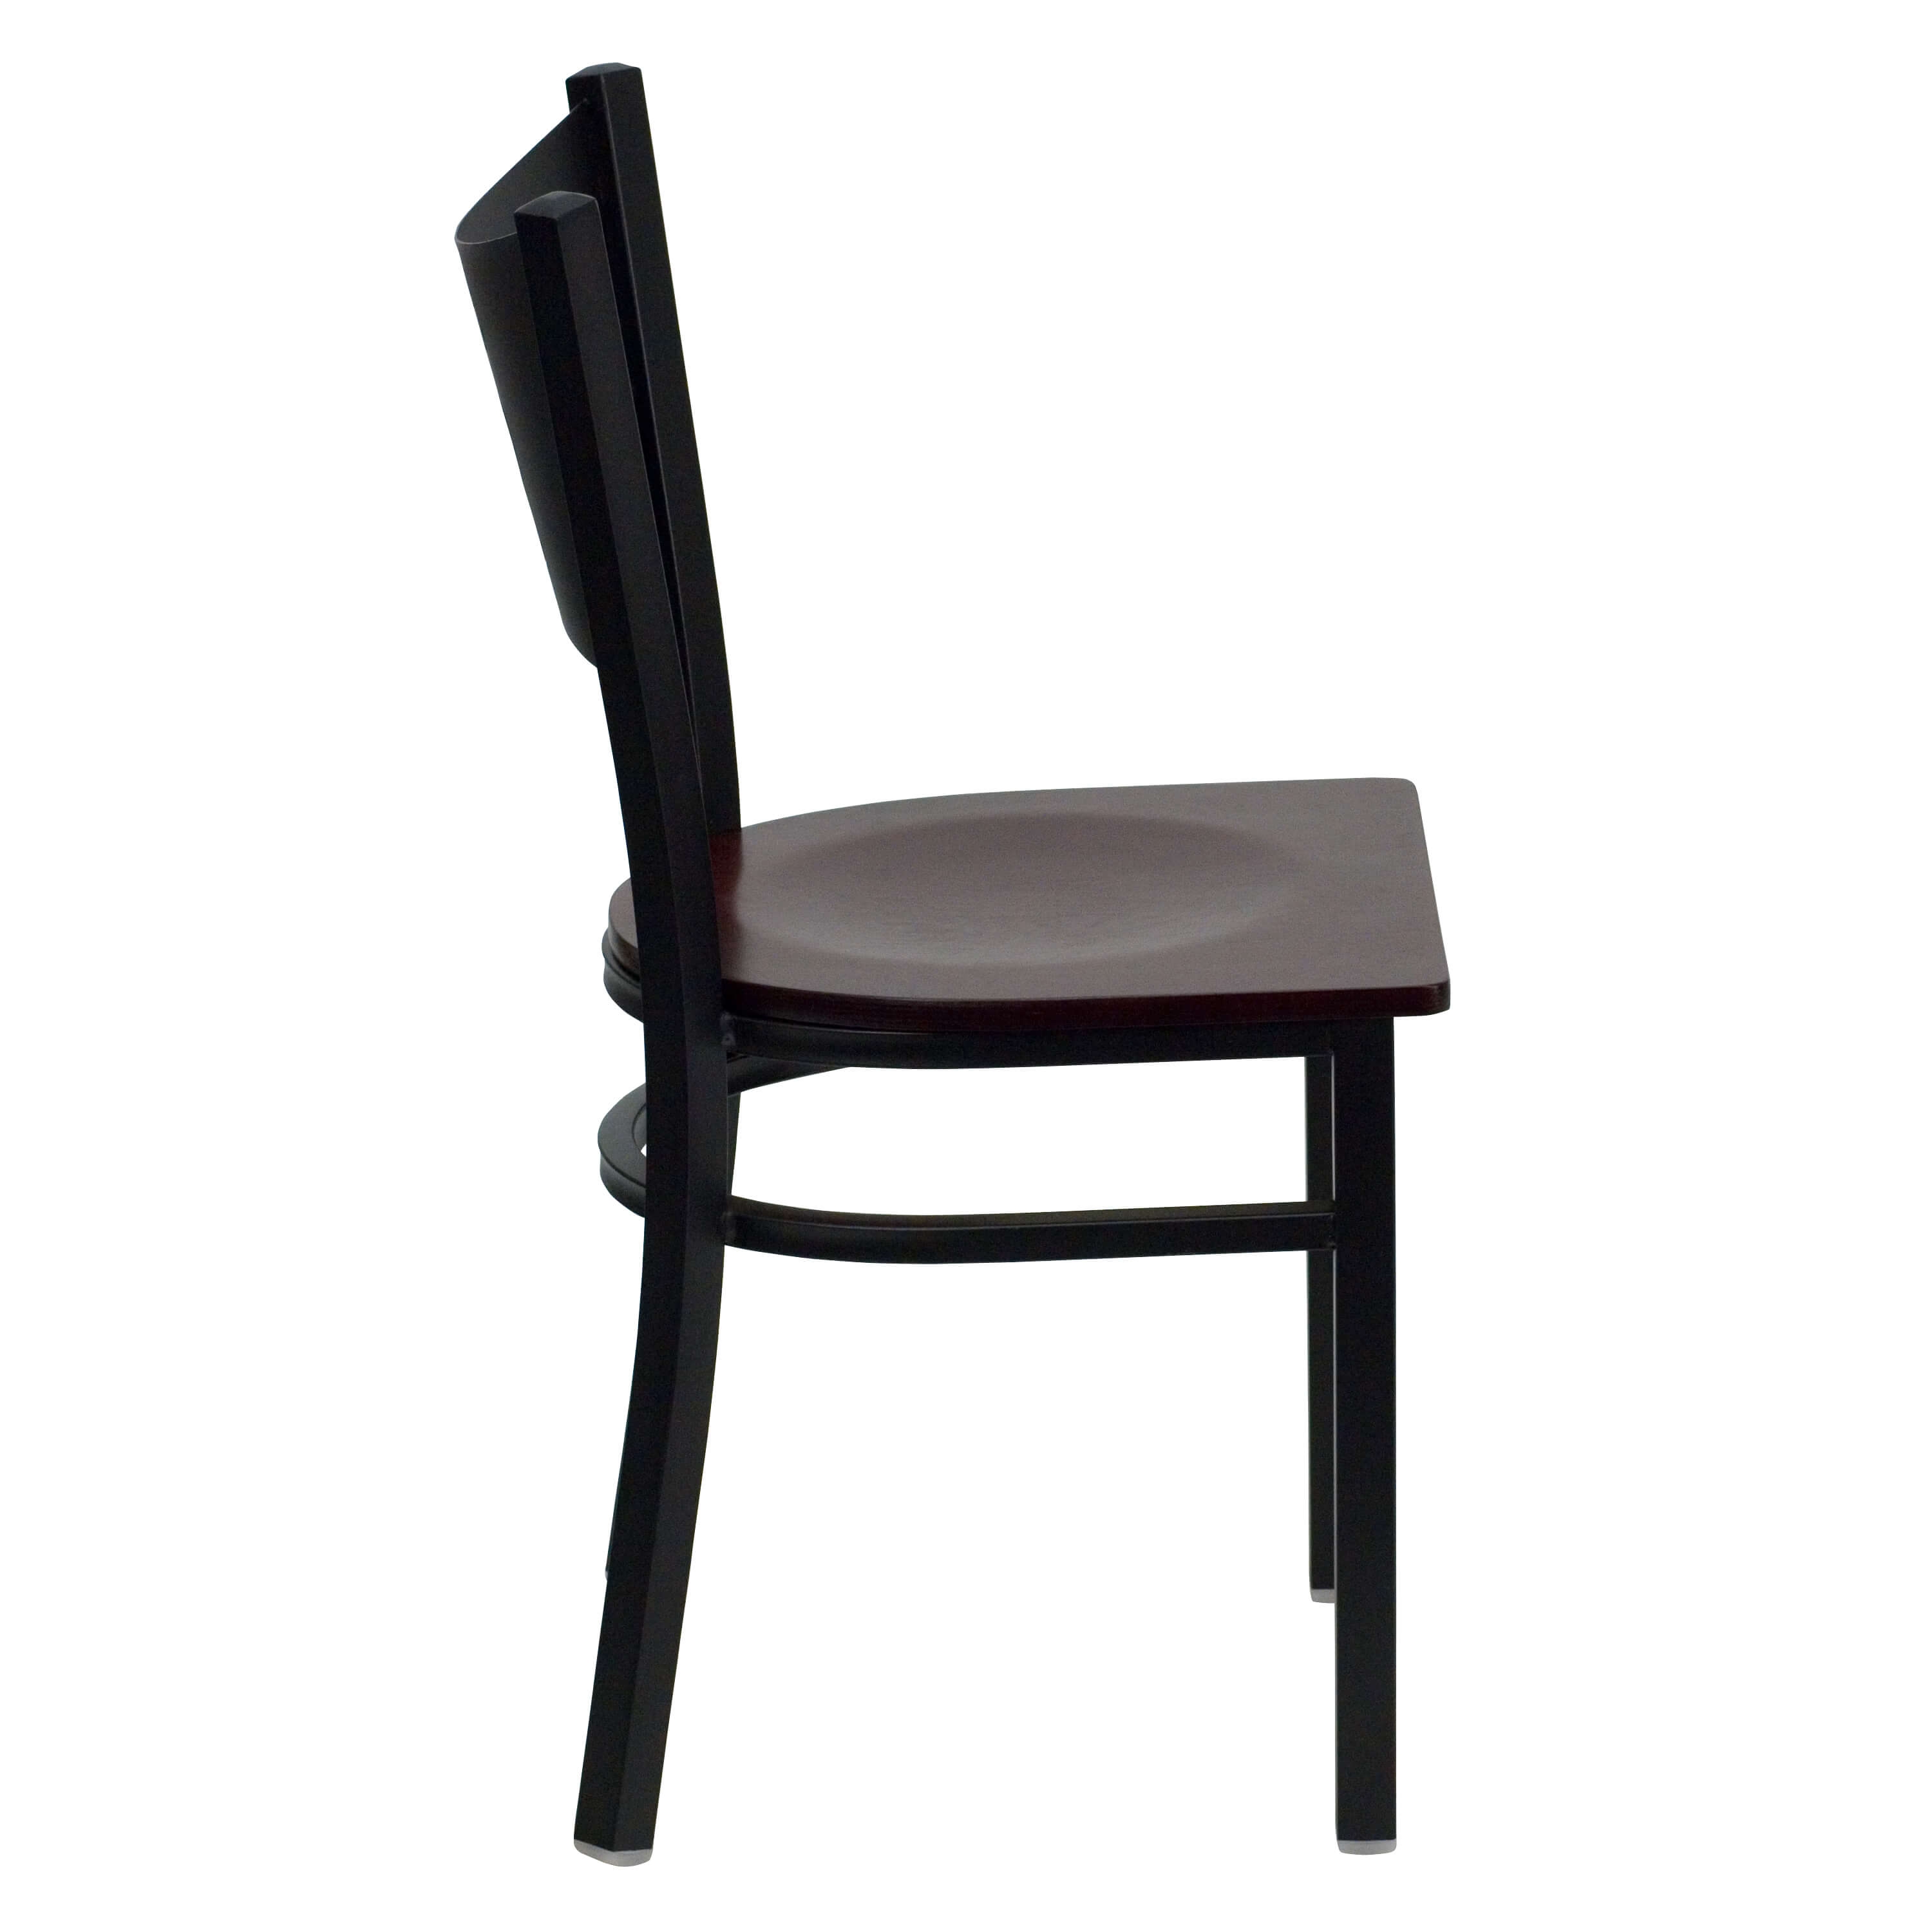 Coffe back casual dining chair side view